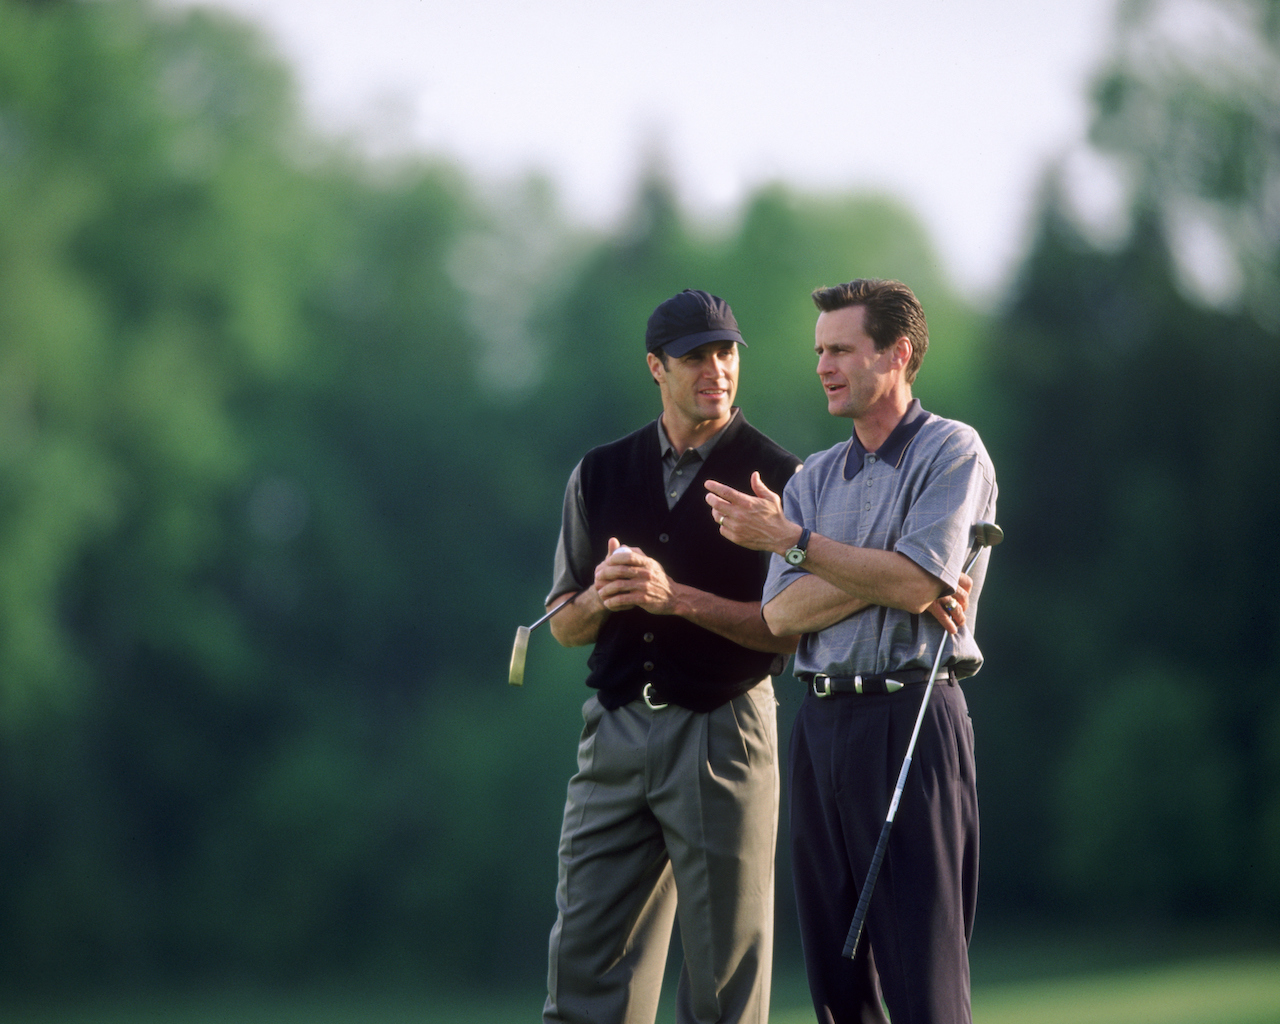 Golfers chatting on the course